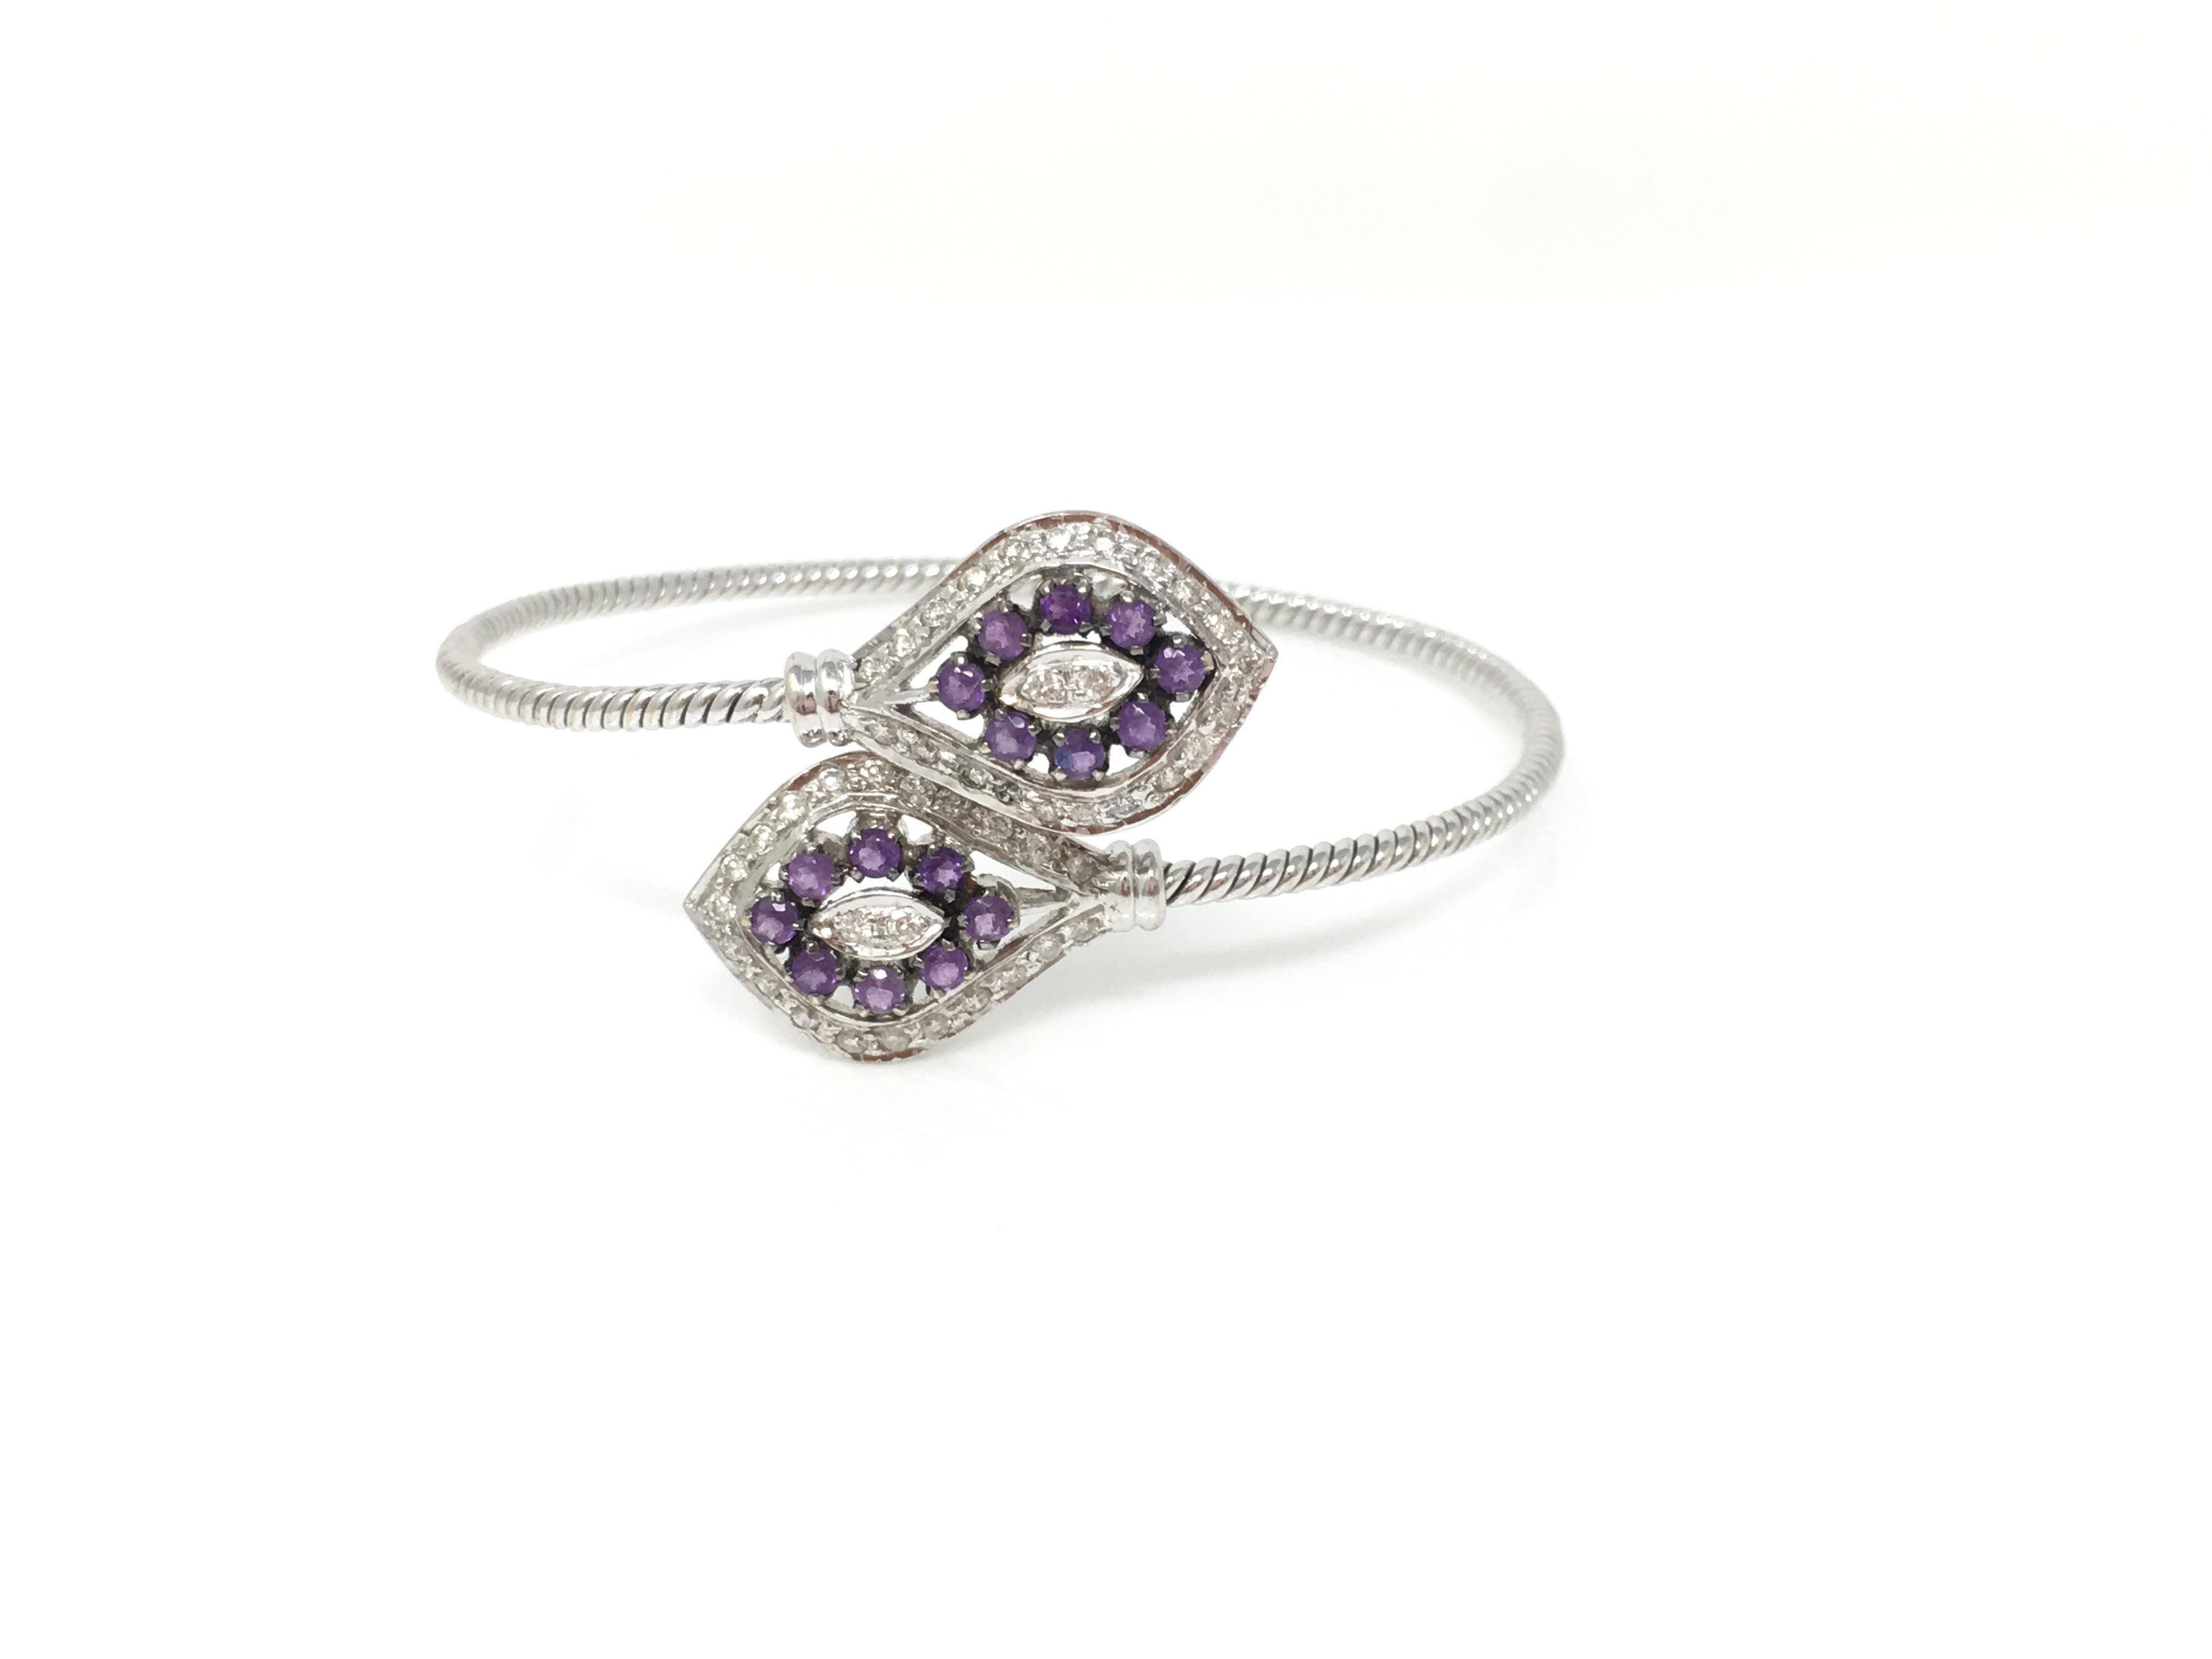 Flexible and adaptable bangle hand created by Moguldiam Inc in 18k white gold features white round brilliant diamonds weighing 0.44 carat ( GH color and VS clarity) and amethyst weighing 1.52 carat. The gold weighs 12.750 grams. The measurement of